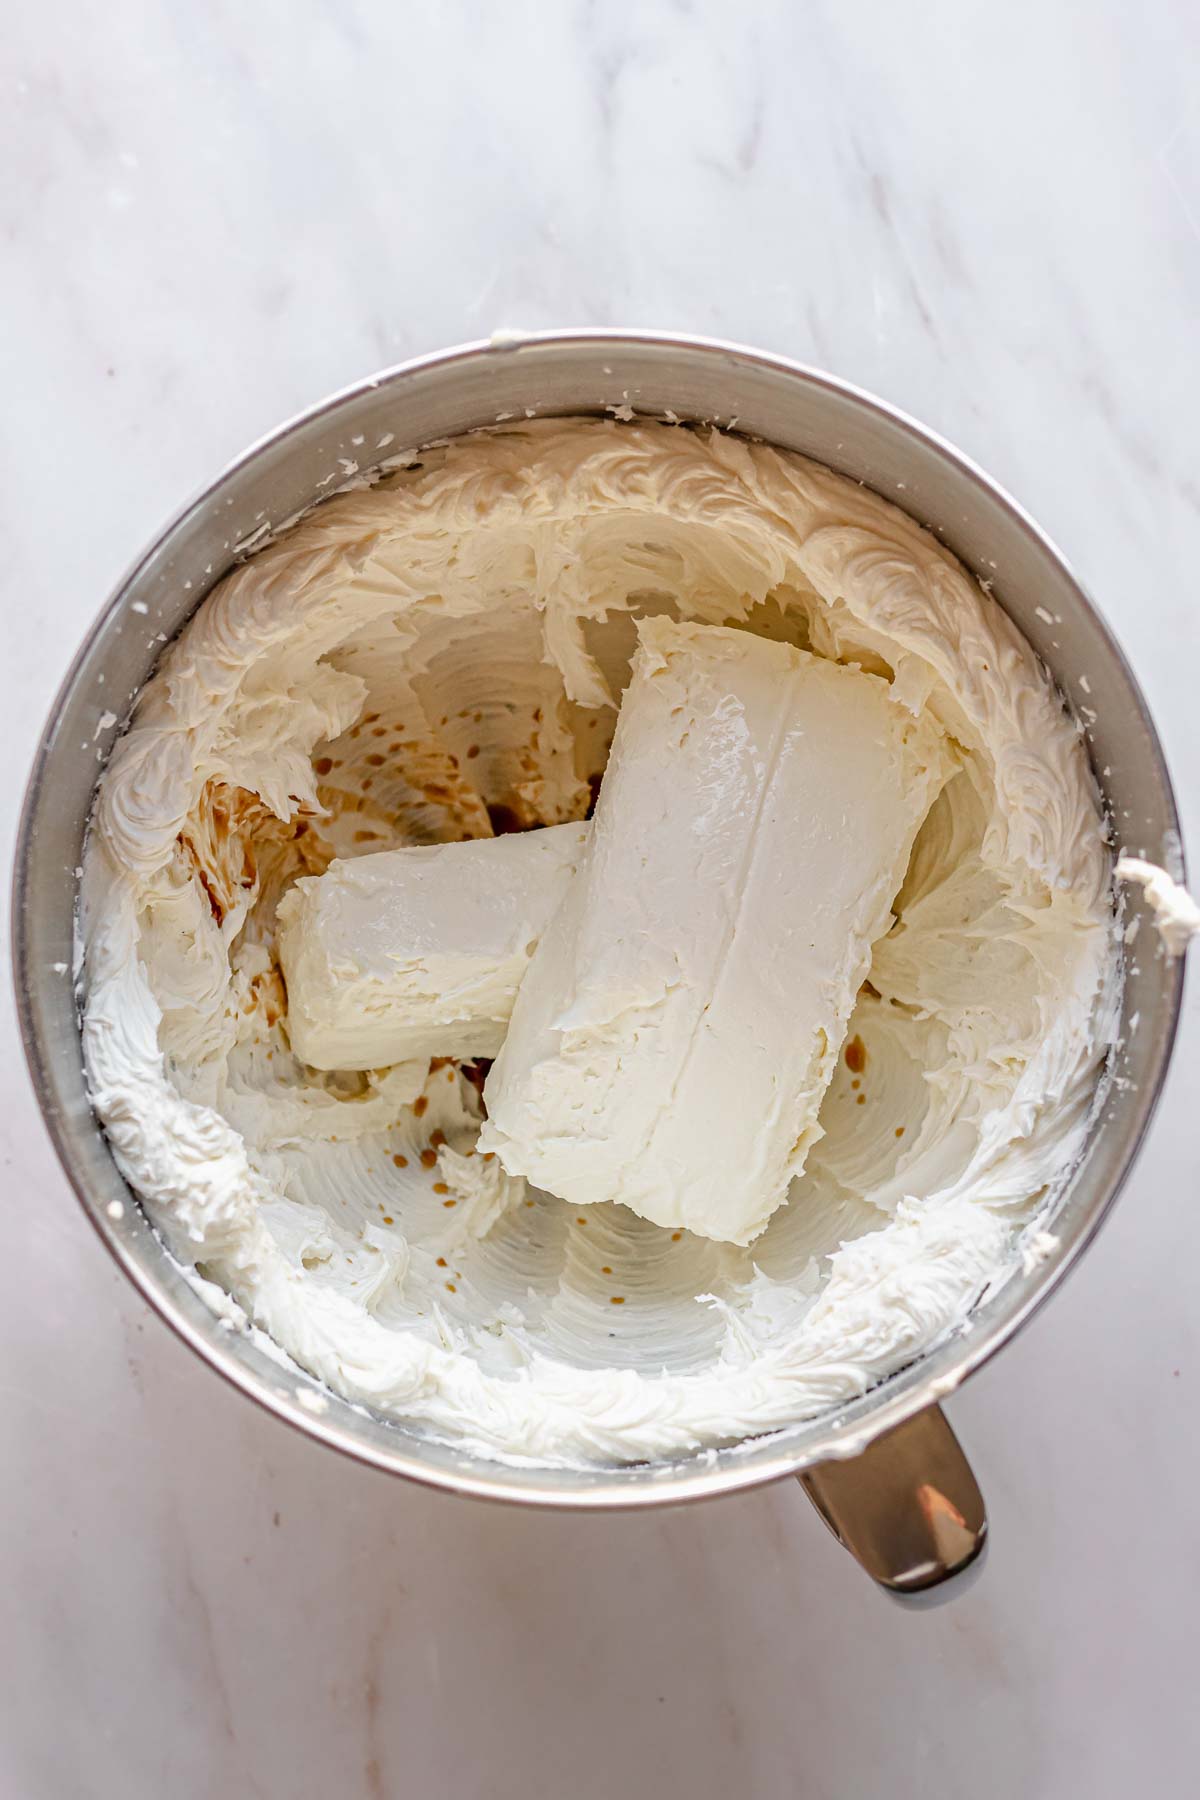 Whipped butter and sugar in a bowl with two bricks of cream cheese.